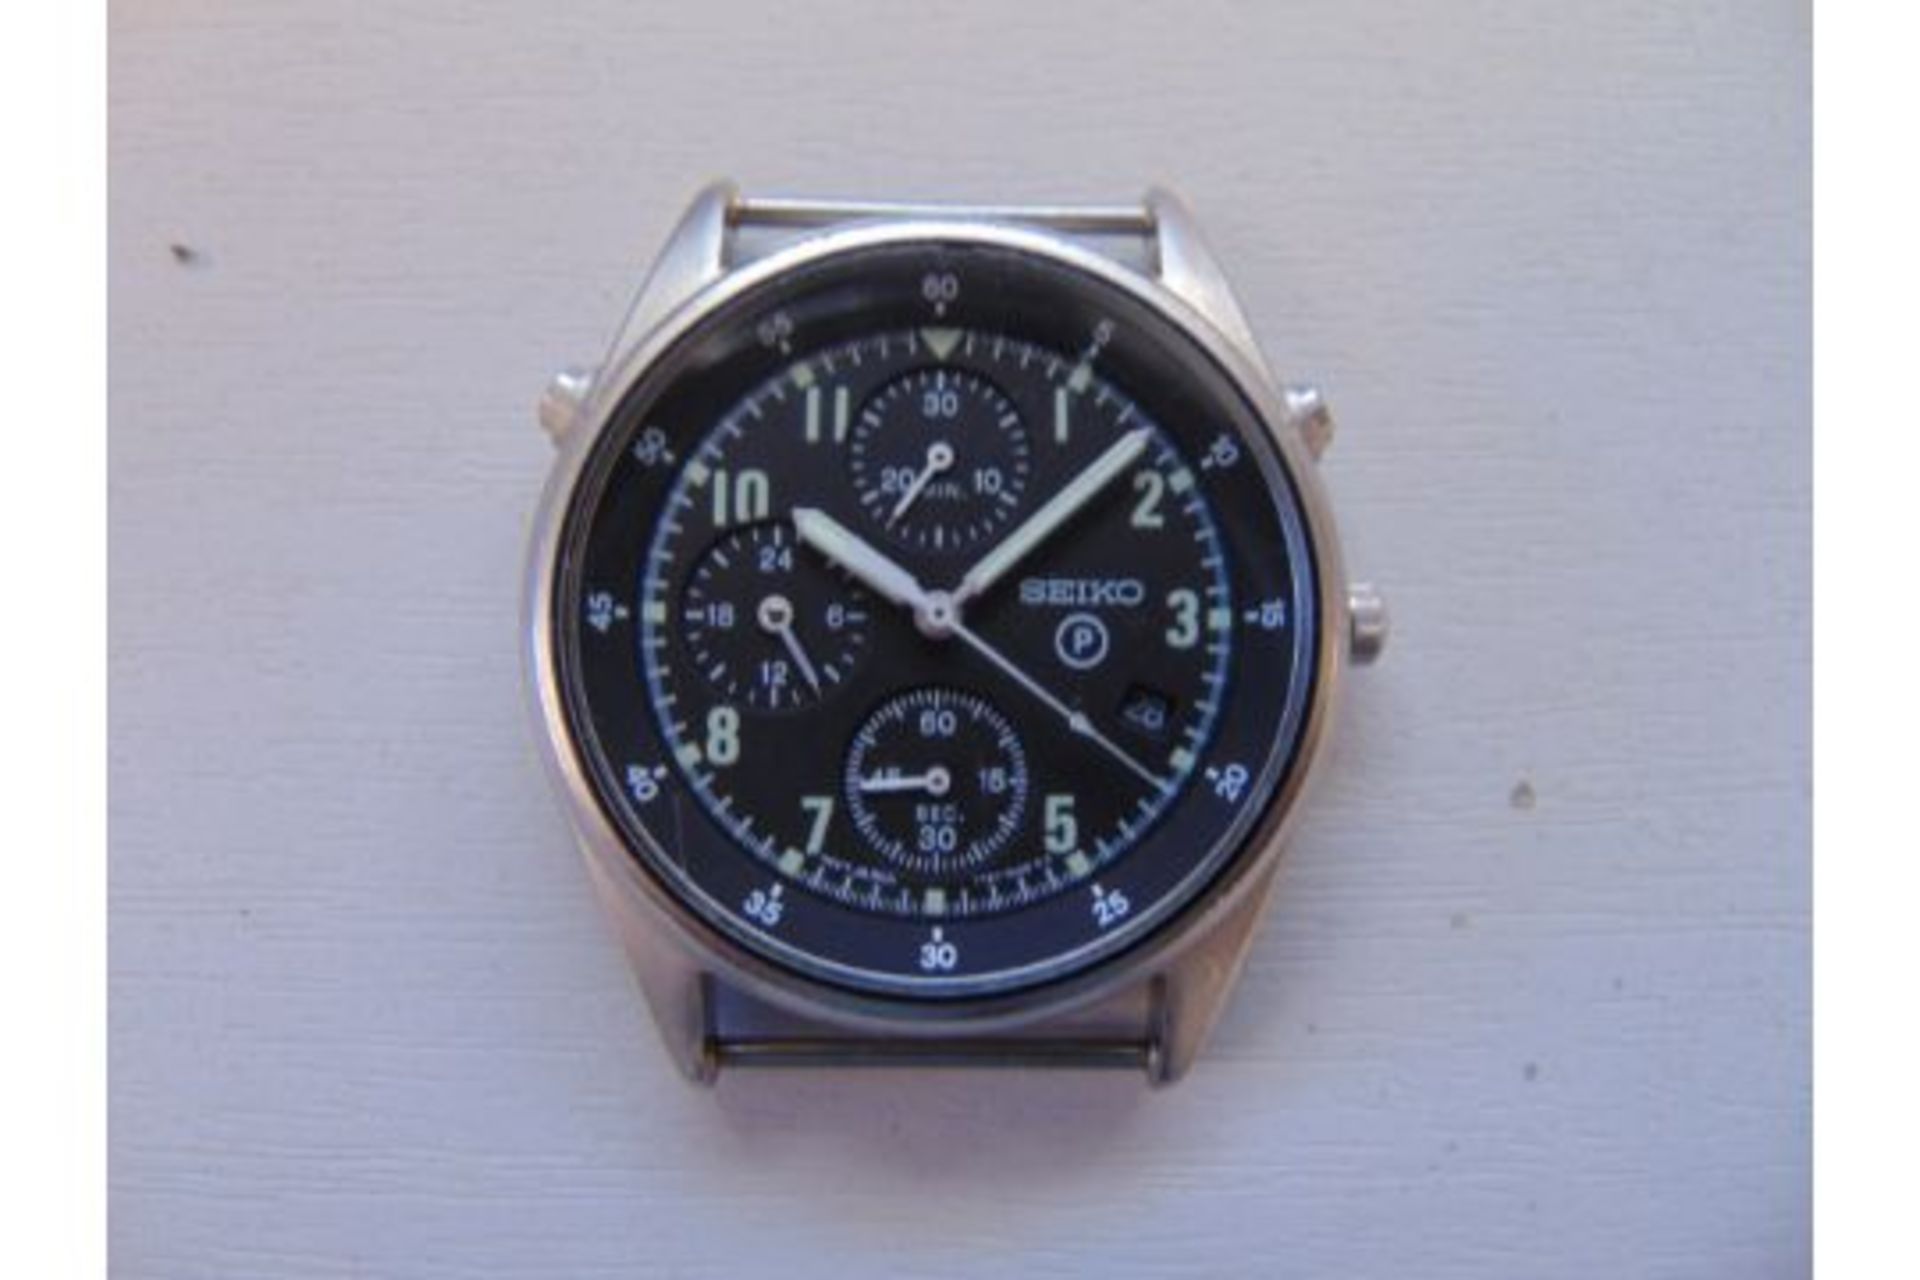 Seiko Gen 2 Pilots Chrono (Date adjust) RAF Tornado Force Issue, Nato Numbers, Date 1995, S/N 3092 - Image 4 of 5